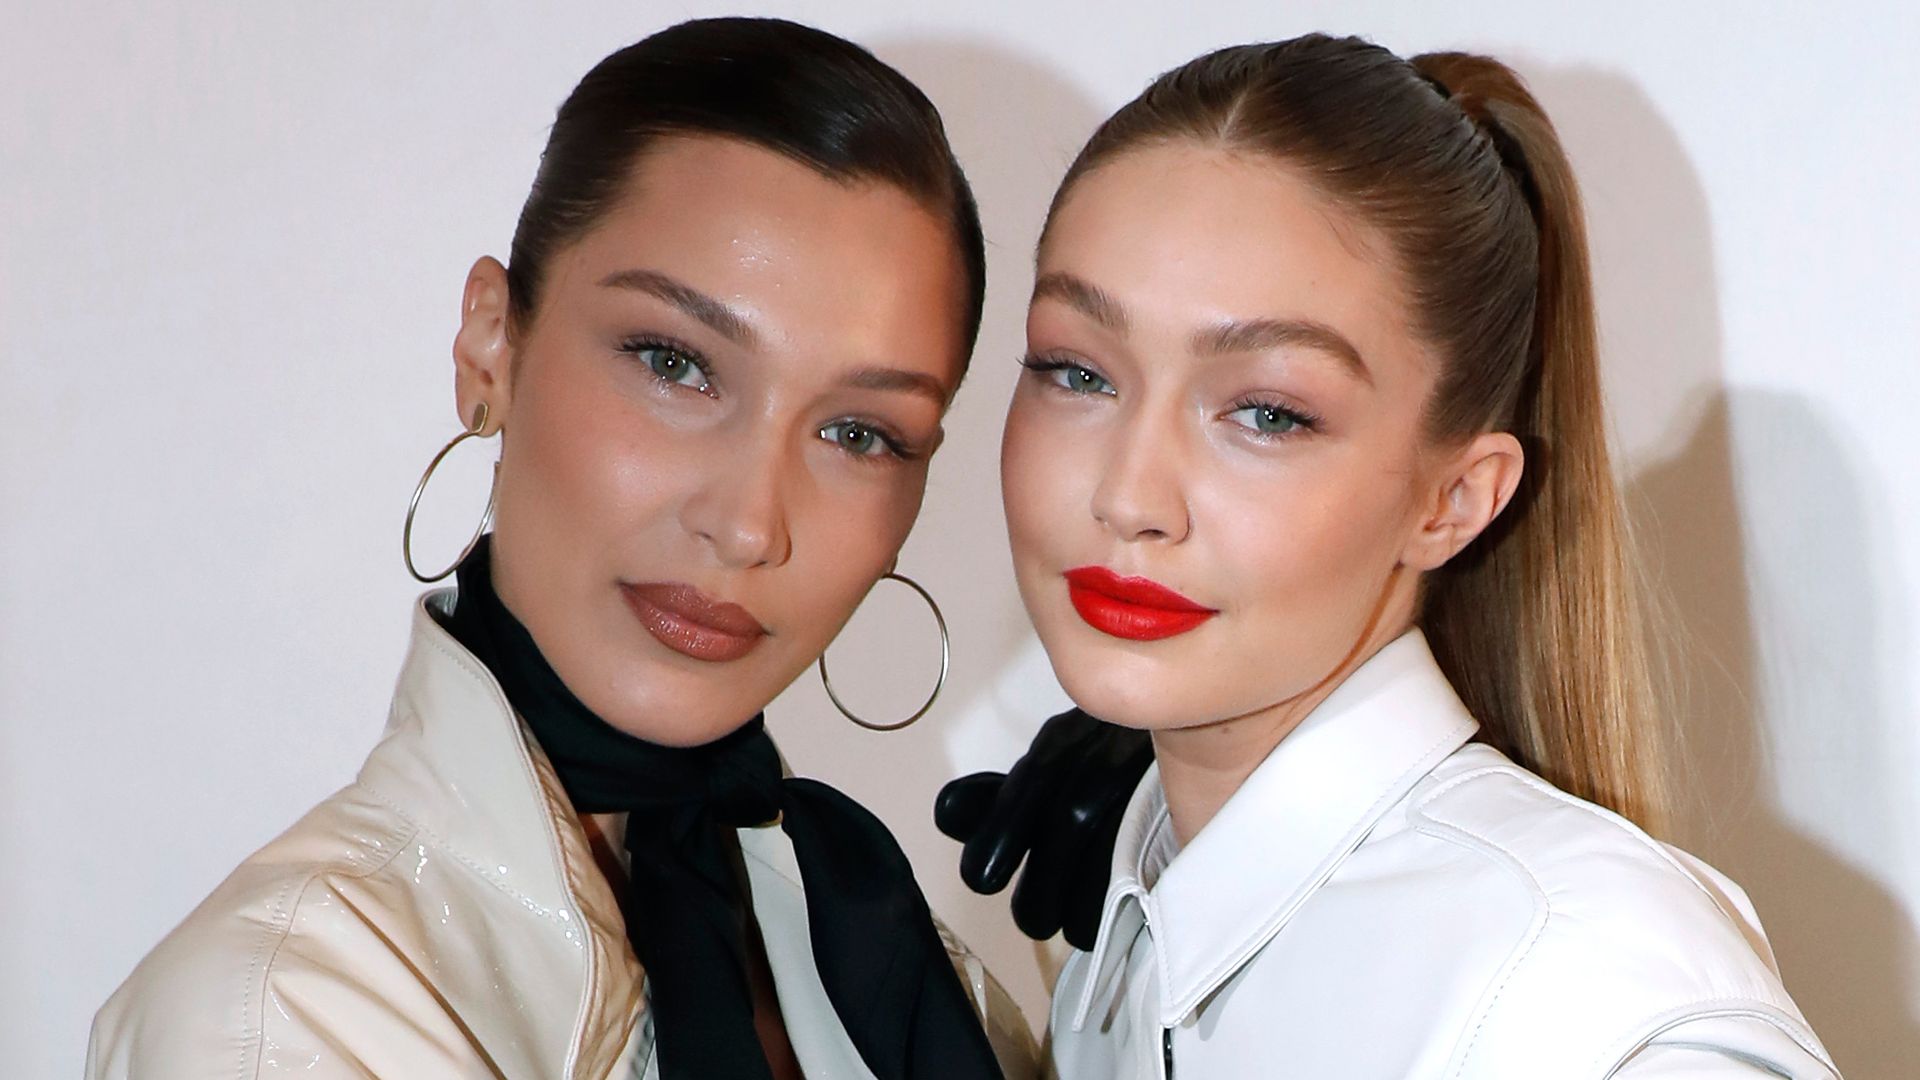 Models Bella Hadid and her sister Gigi Hadid attend the LVMH Prize 2019 Edition at Louis Vuitton Avenue Montaigne Store on March 01, 2019 in Paris, France.